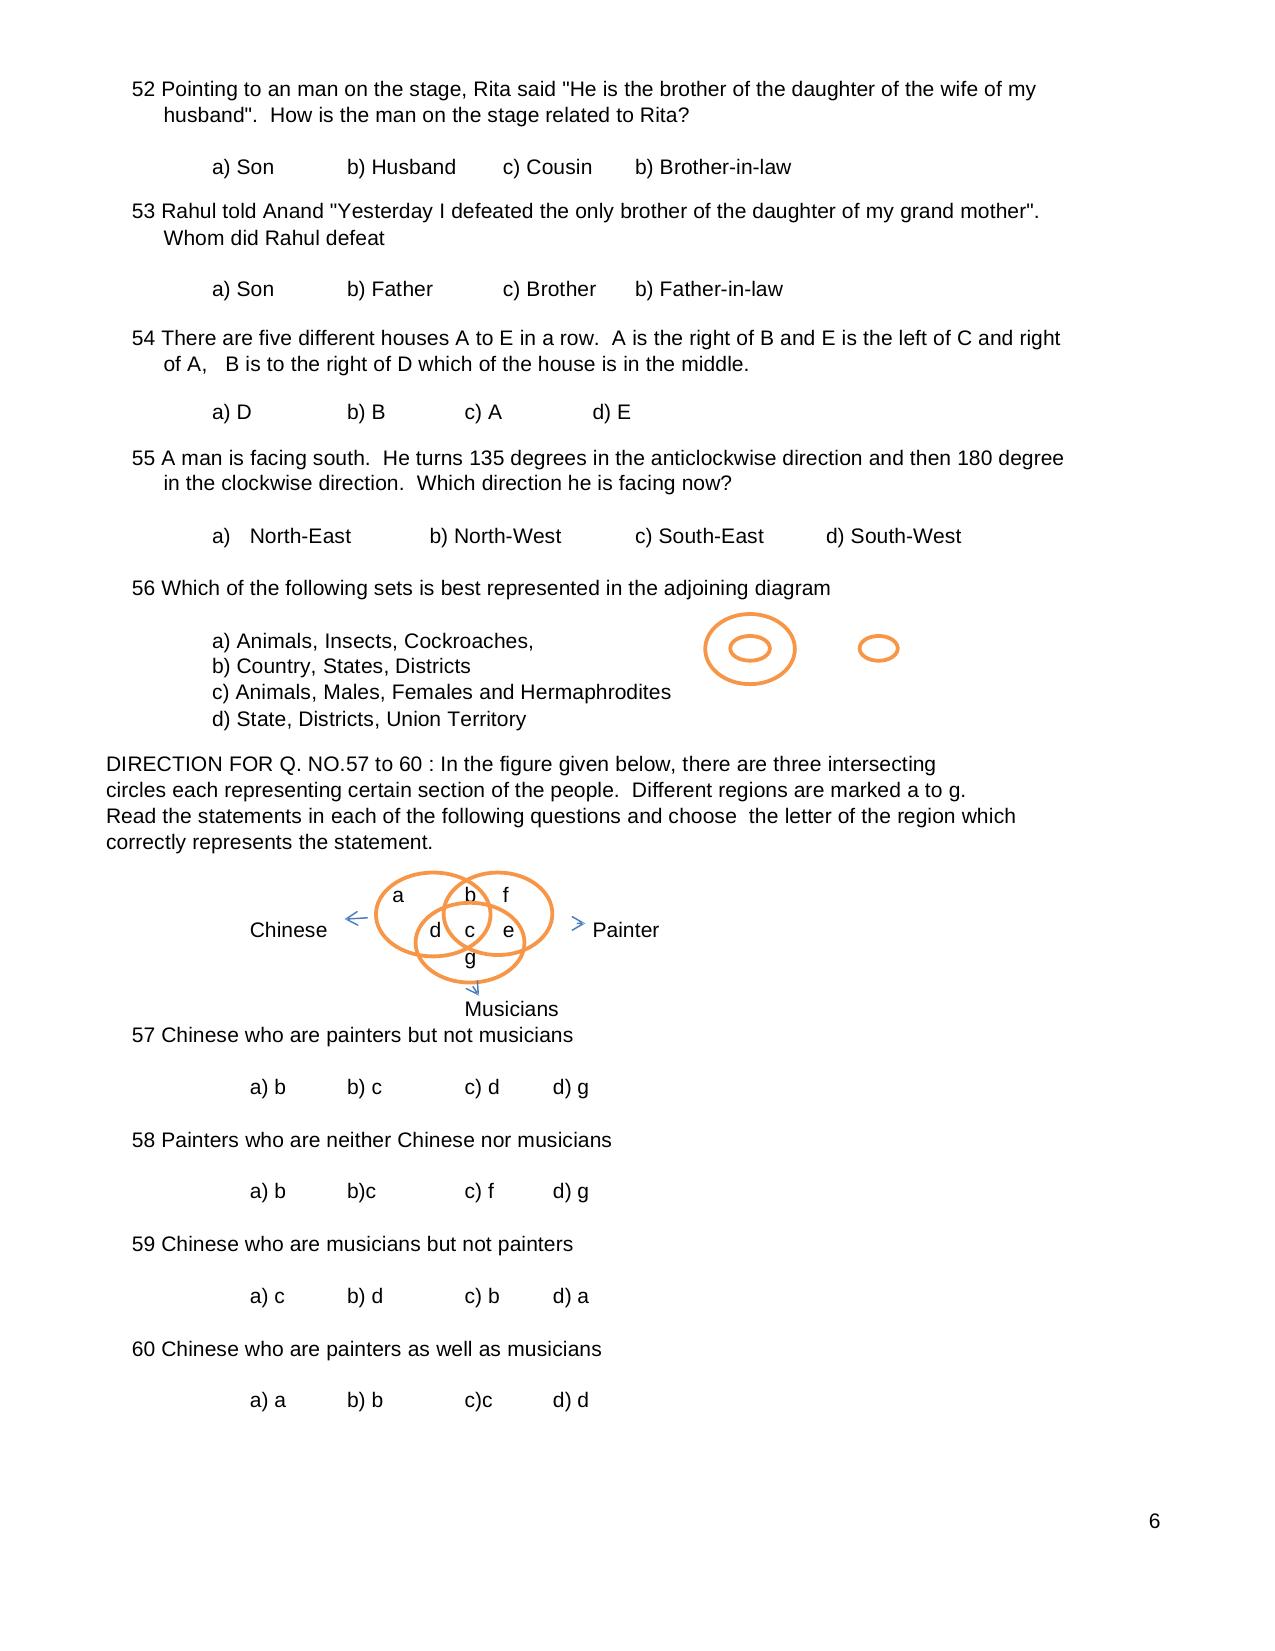 TNPSC Assistant System Engineer Sample Papers Numerical Ability - Page 6